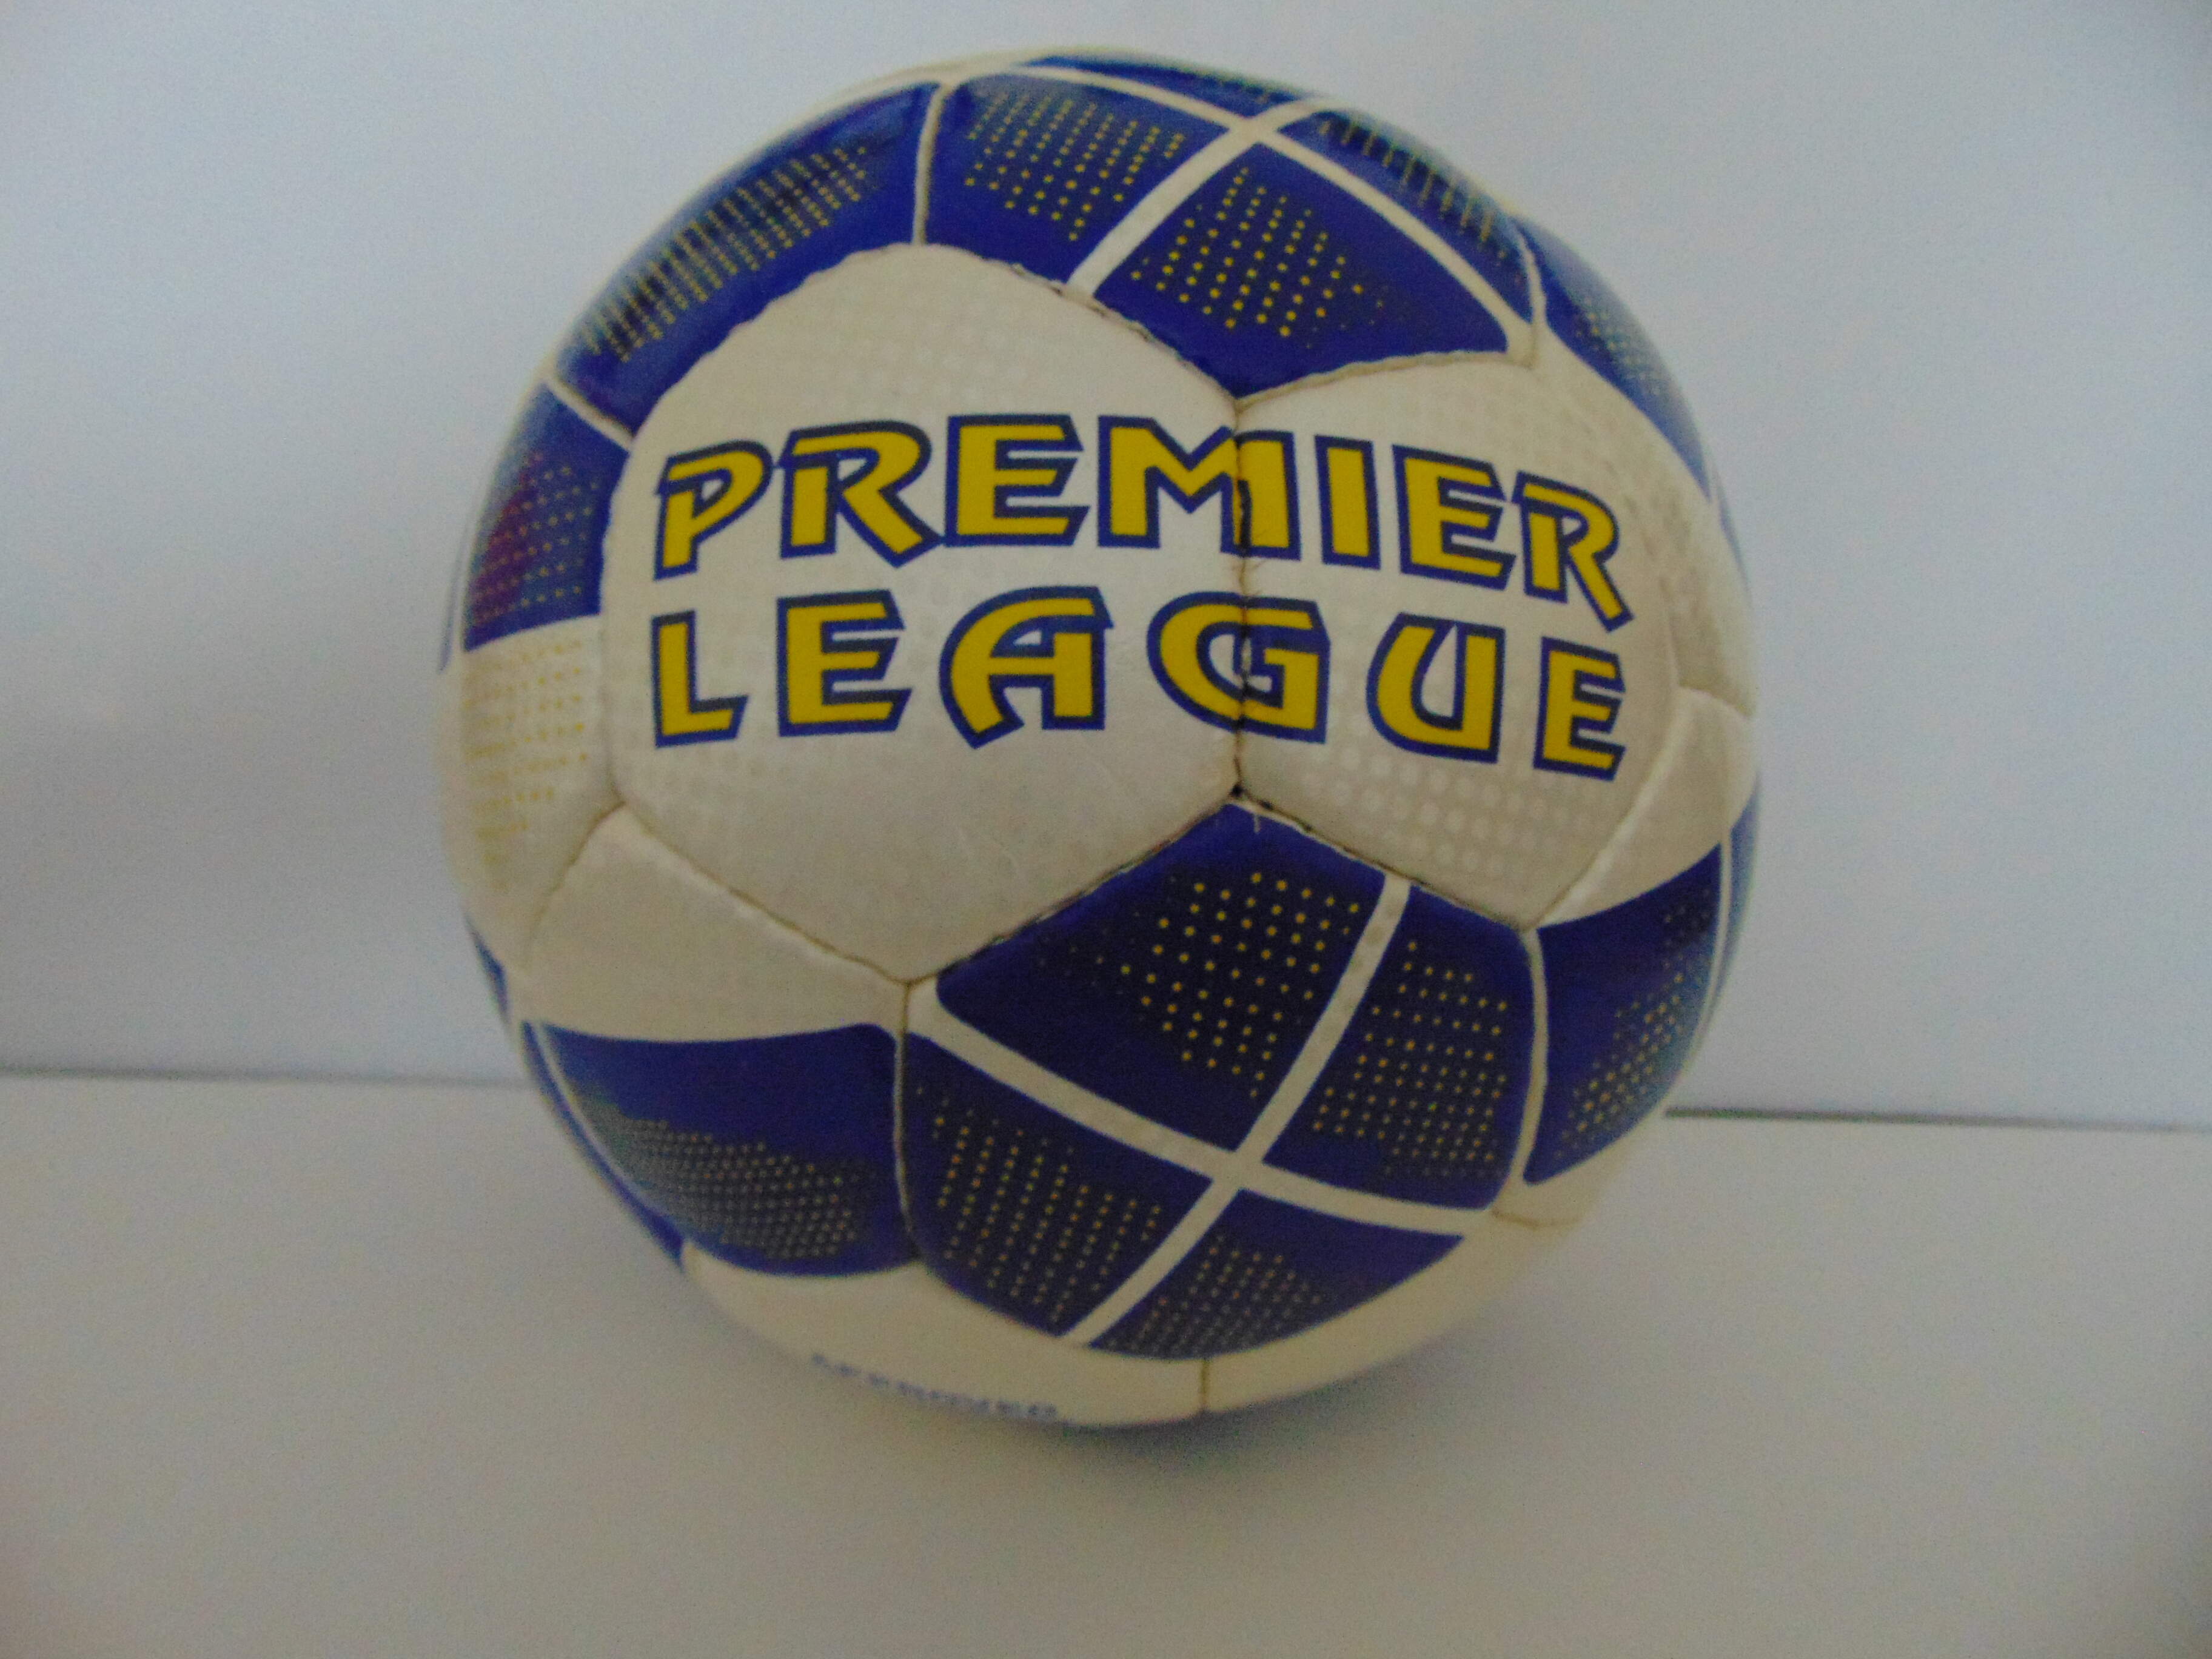 Team Match Football  Size 5 Approved Competition 312.w2f RRP £ 40.00 Now £ 12.00